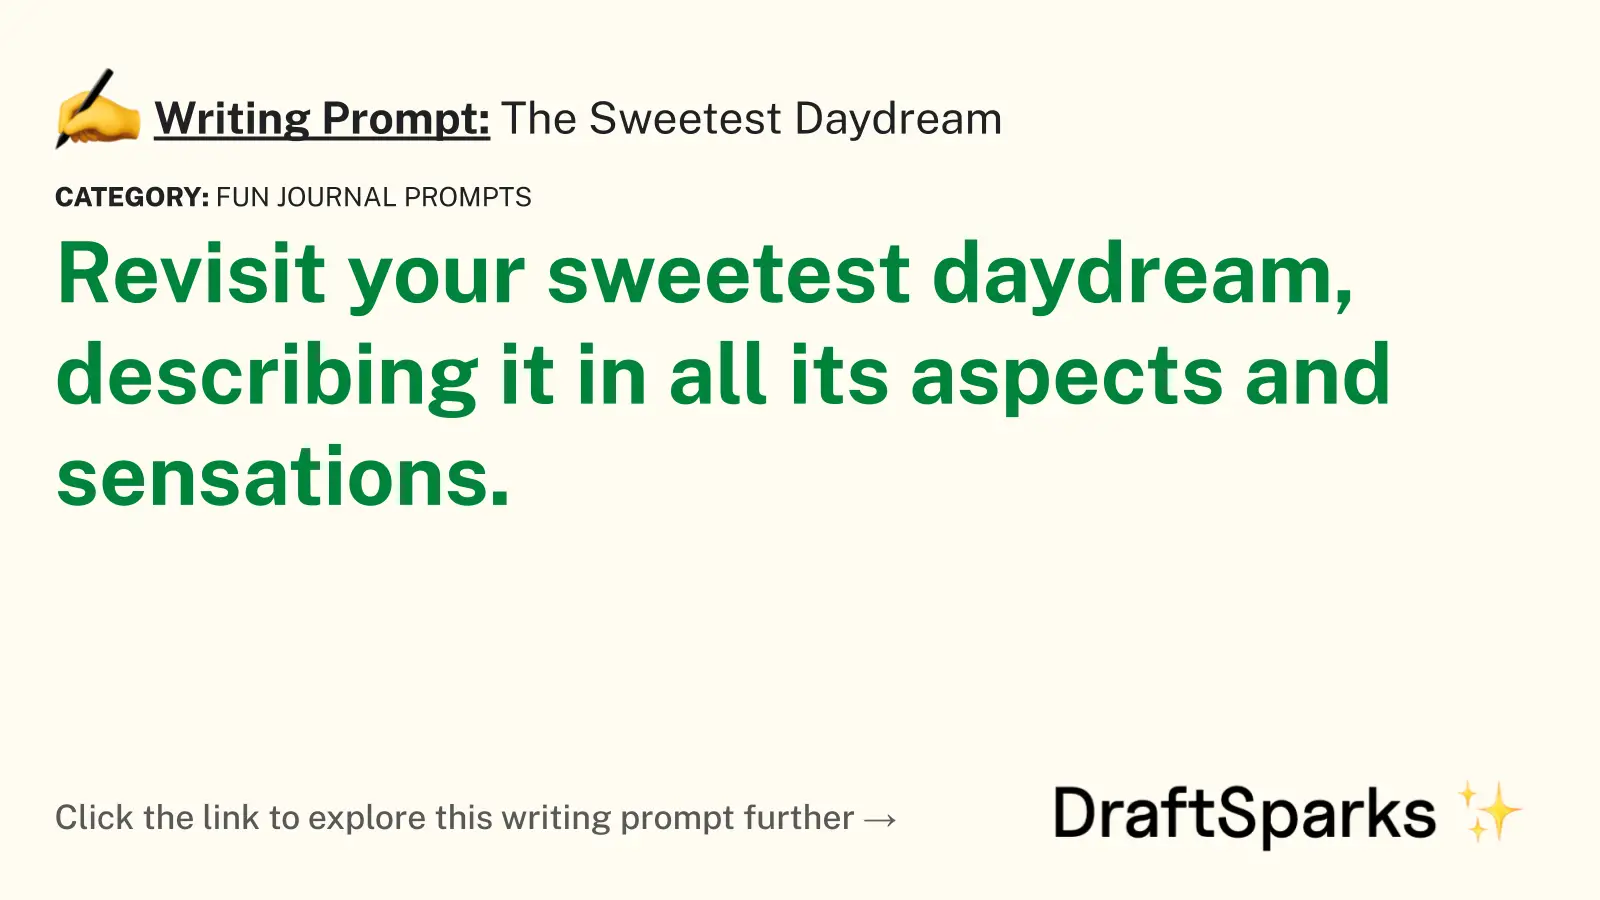 The Sweetest Daydream